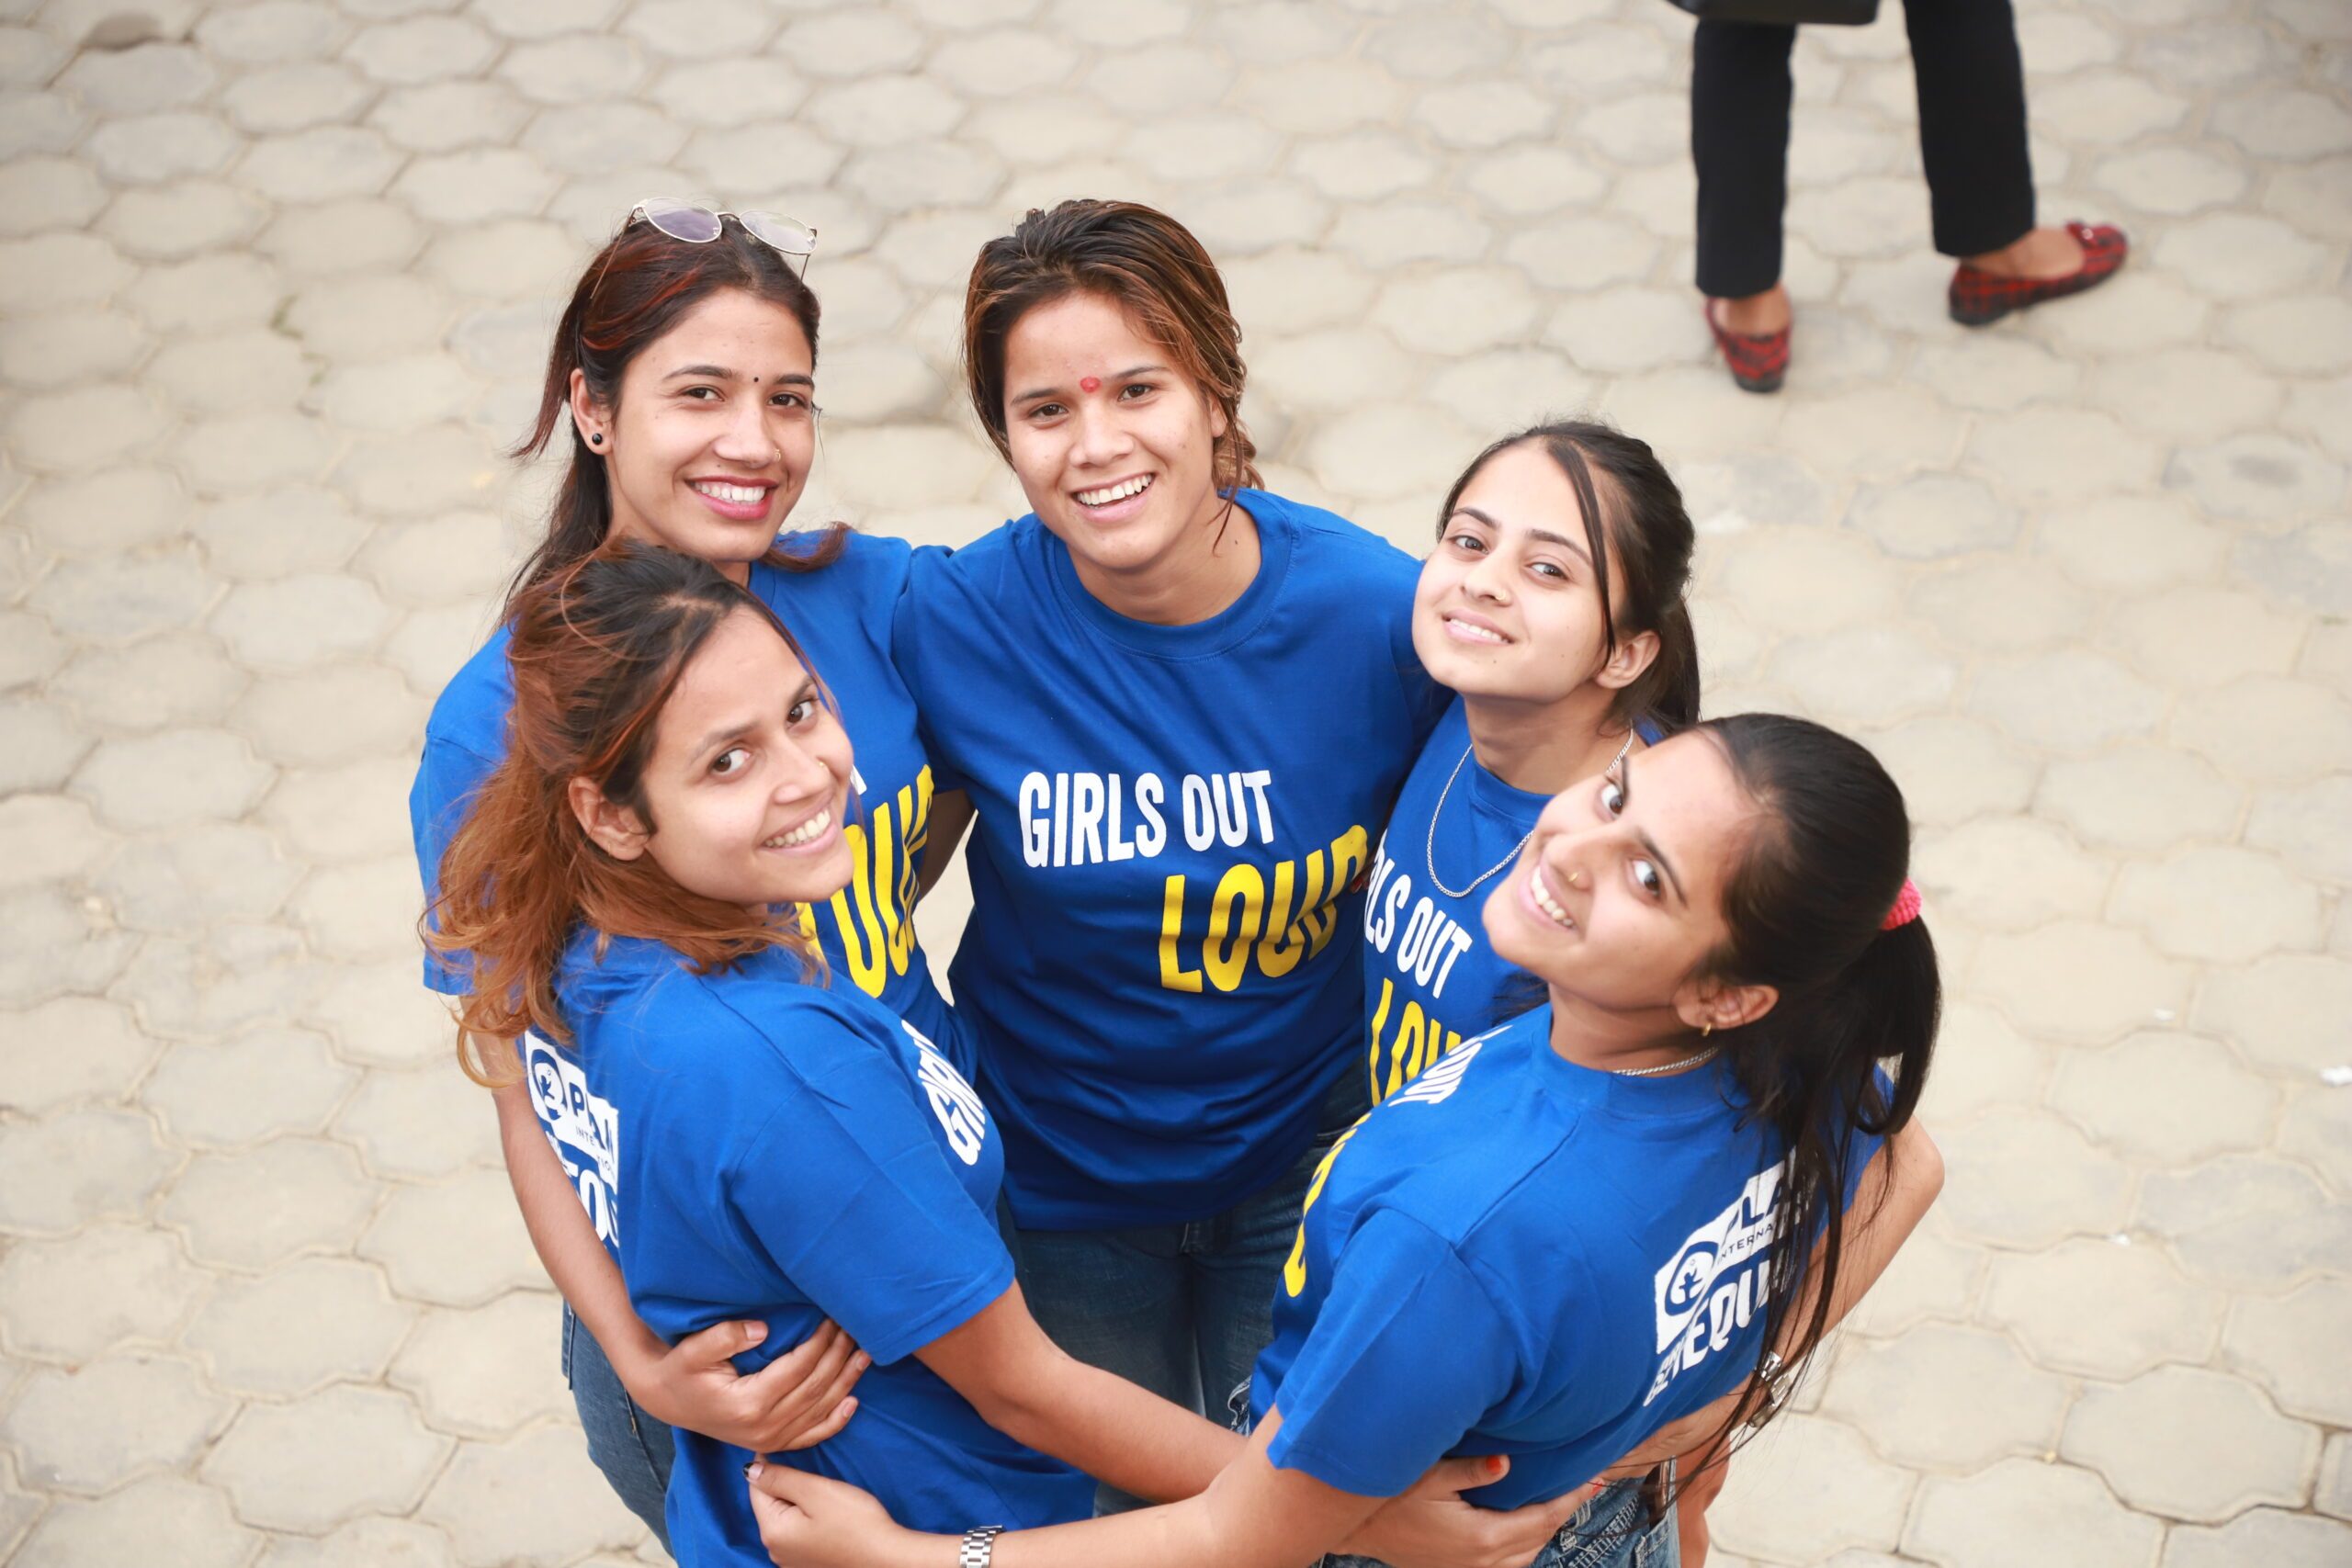 Swastika (second from right) participating in a Girls Out Loud event. 